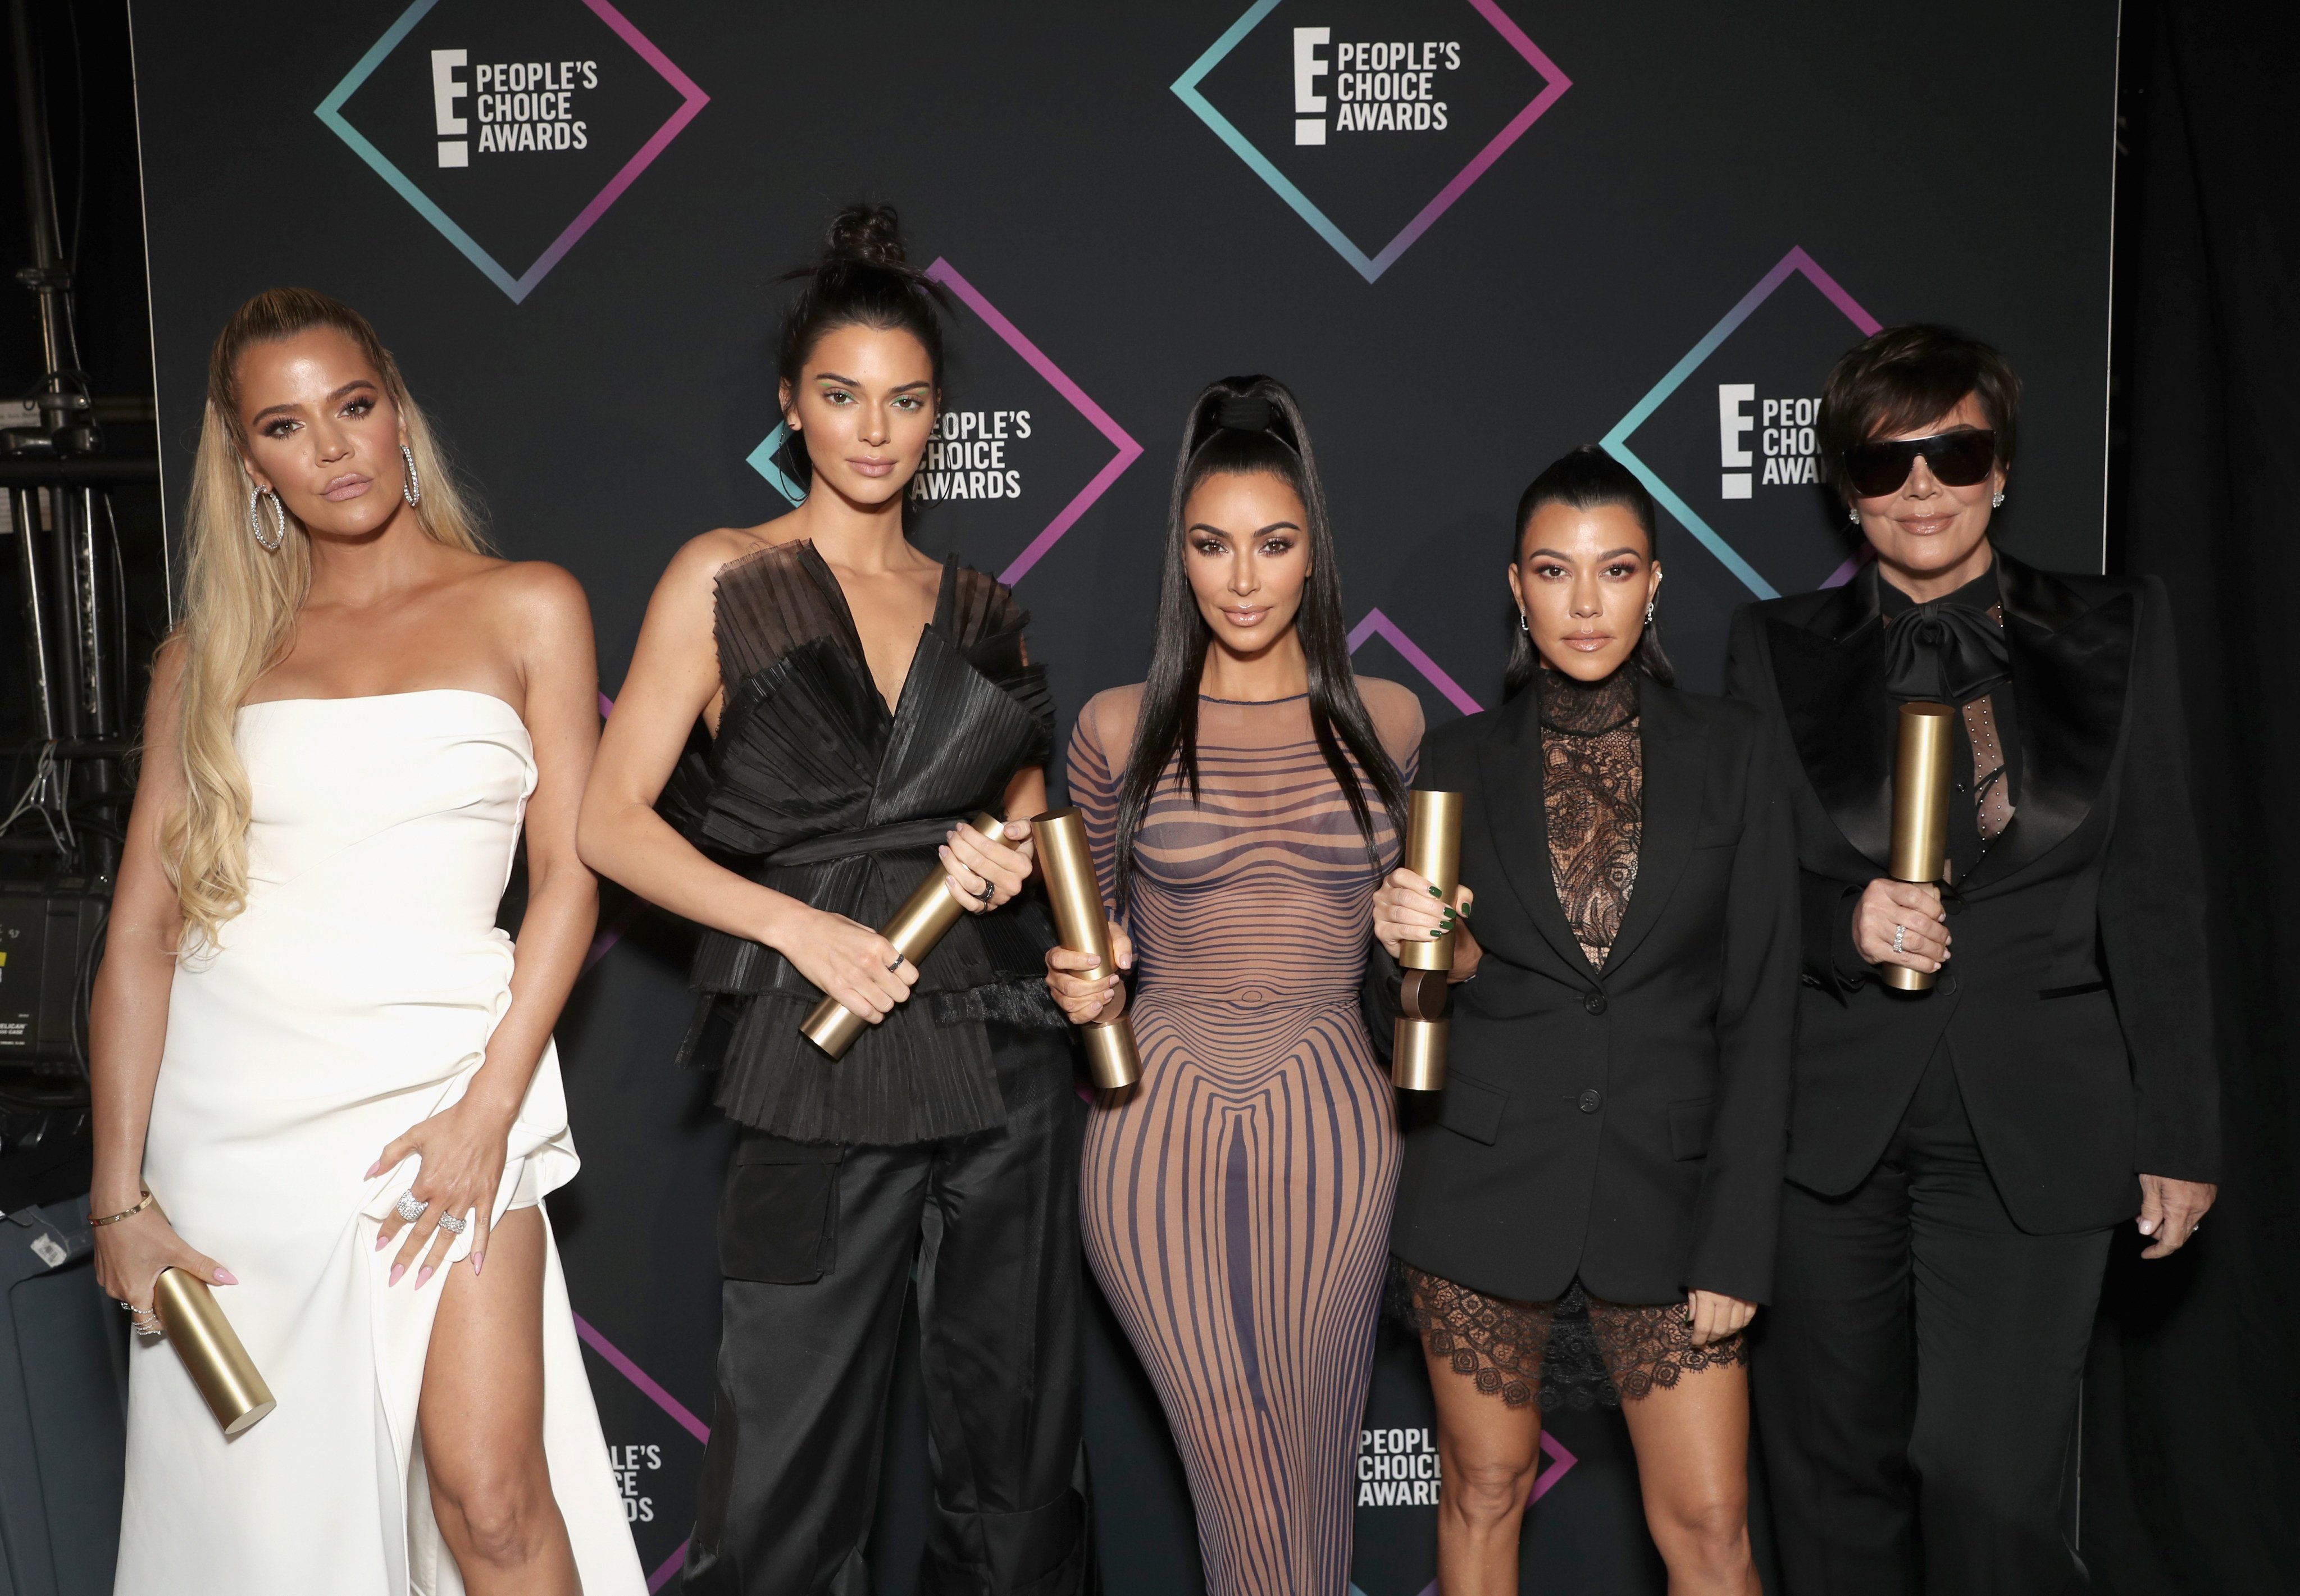 SANTA MONICA, CA - NOVEMBER 11:  2018 E! PEOPLE&apos;S CHOICE AWARDS -- Pictured: (l-r) Khloe Kardashian, Kendall Jenner, Kim Kardashian, Kourtney Kardashian and Kris Jenne, winners of the Reality Show of 2018 for &apos;Keeping Up With The Kardashians&apos; pose backstage during the 2018 E! People&apos;s Choice Awards held at the Barker Hangar on November 11, 2018 --  NUP_185073  --  (Photo by Todd Williamson/E! Entertainment/NBCU Photo Bank/NBCUniversal via Getty Images)